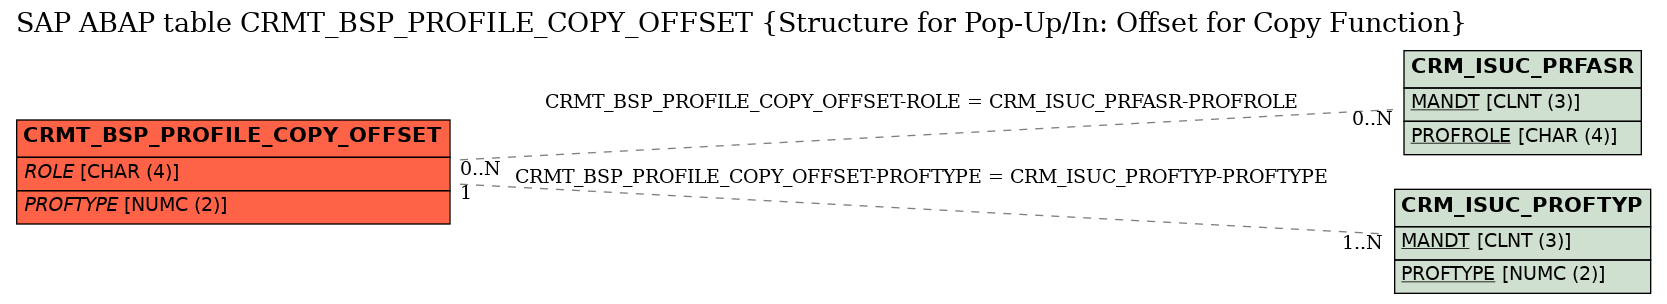 E-R Diagram for table CRMT_BSP_PROFILE_COPY_OFFSET (Structure for Pop-Up/In: Offset for Copy Function)